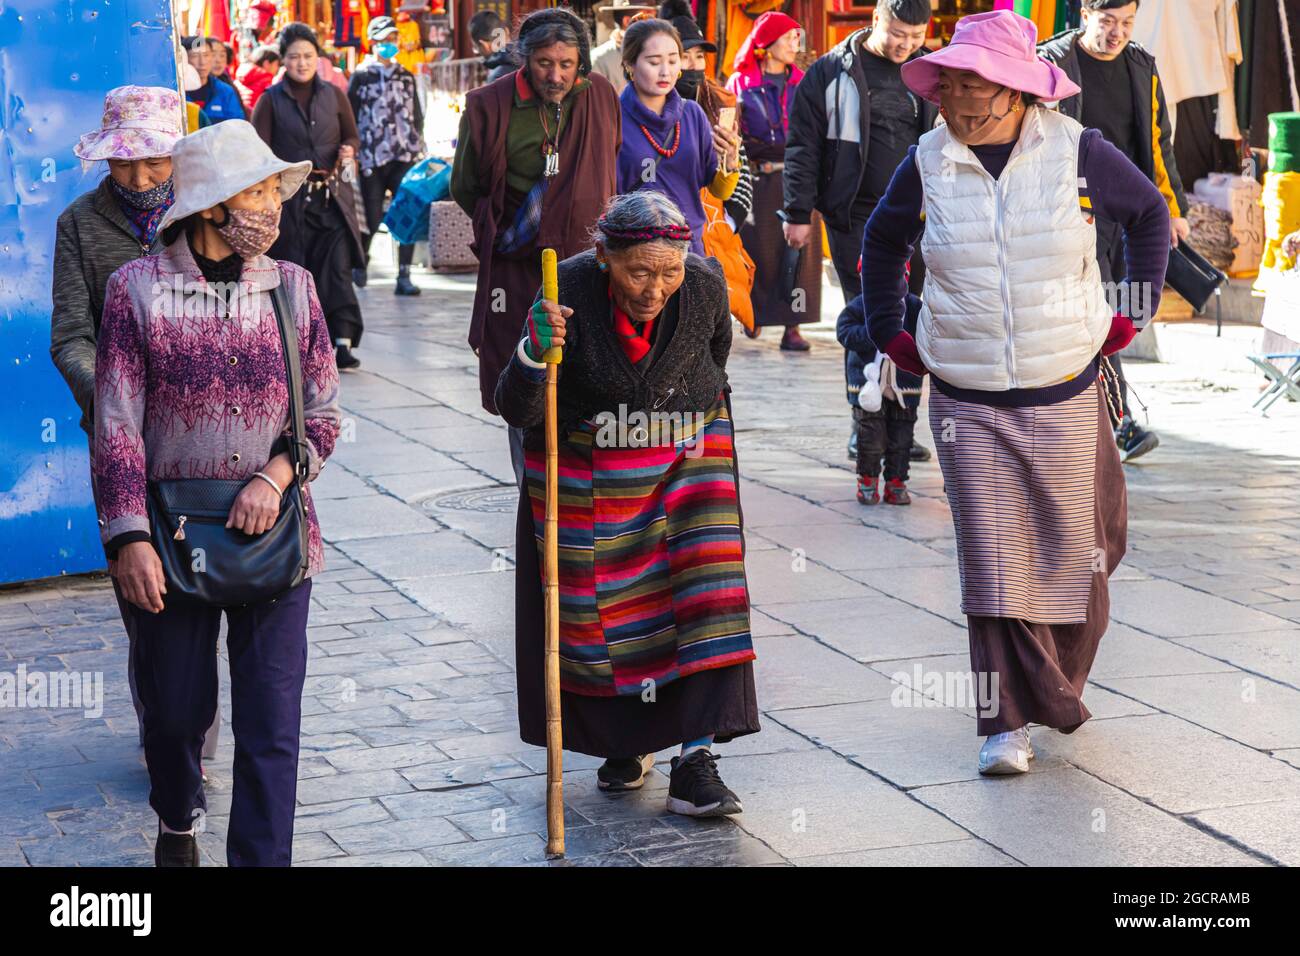 Lhasa, Tibet, China - November 15, 2020:  Old Tibetan woman in traditional Tibetan clothes and walking stick. For prayer purpose people walking on the Stock Photo